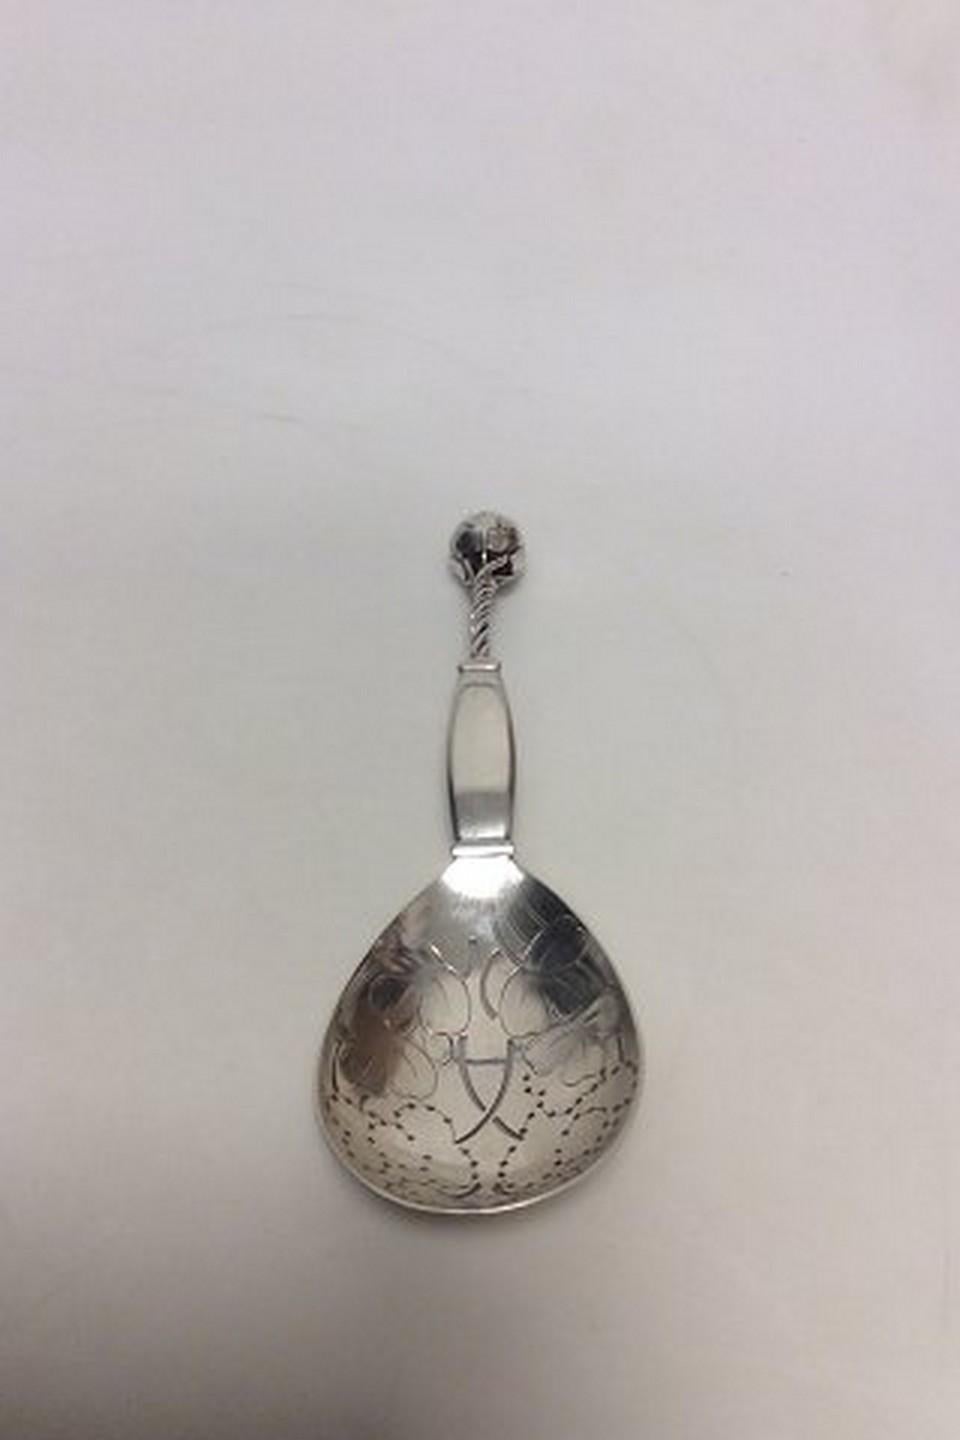 Georg Jensen strawberry spoon in silver from 1908-1914 no 35.

Measures: 20cm / 7.87